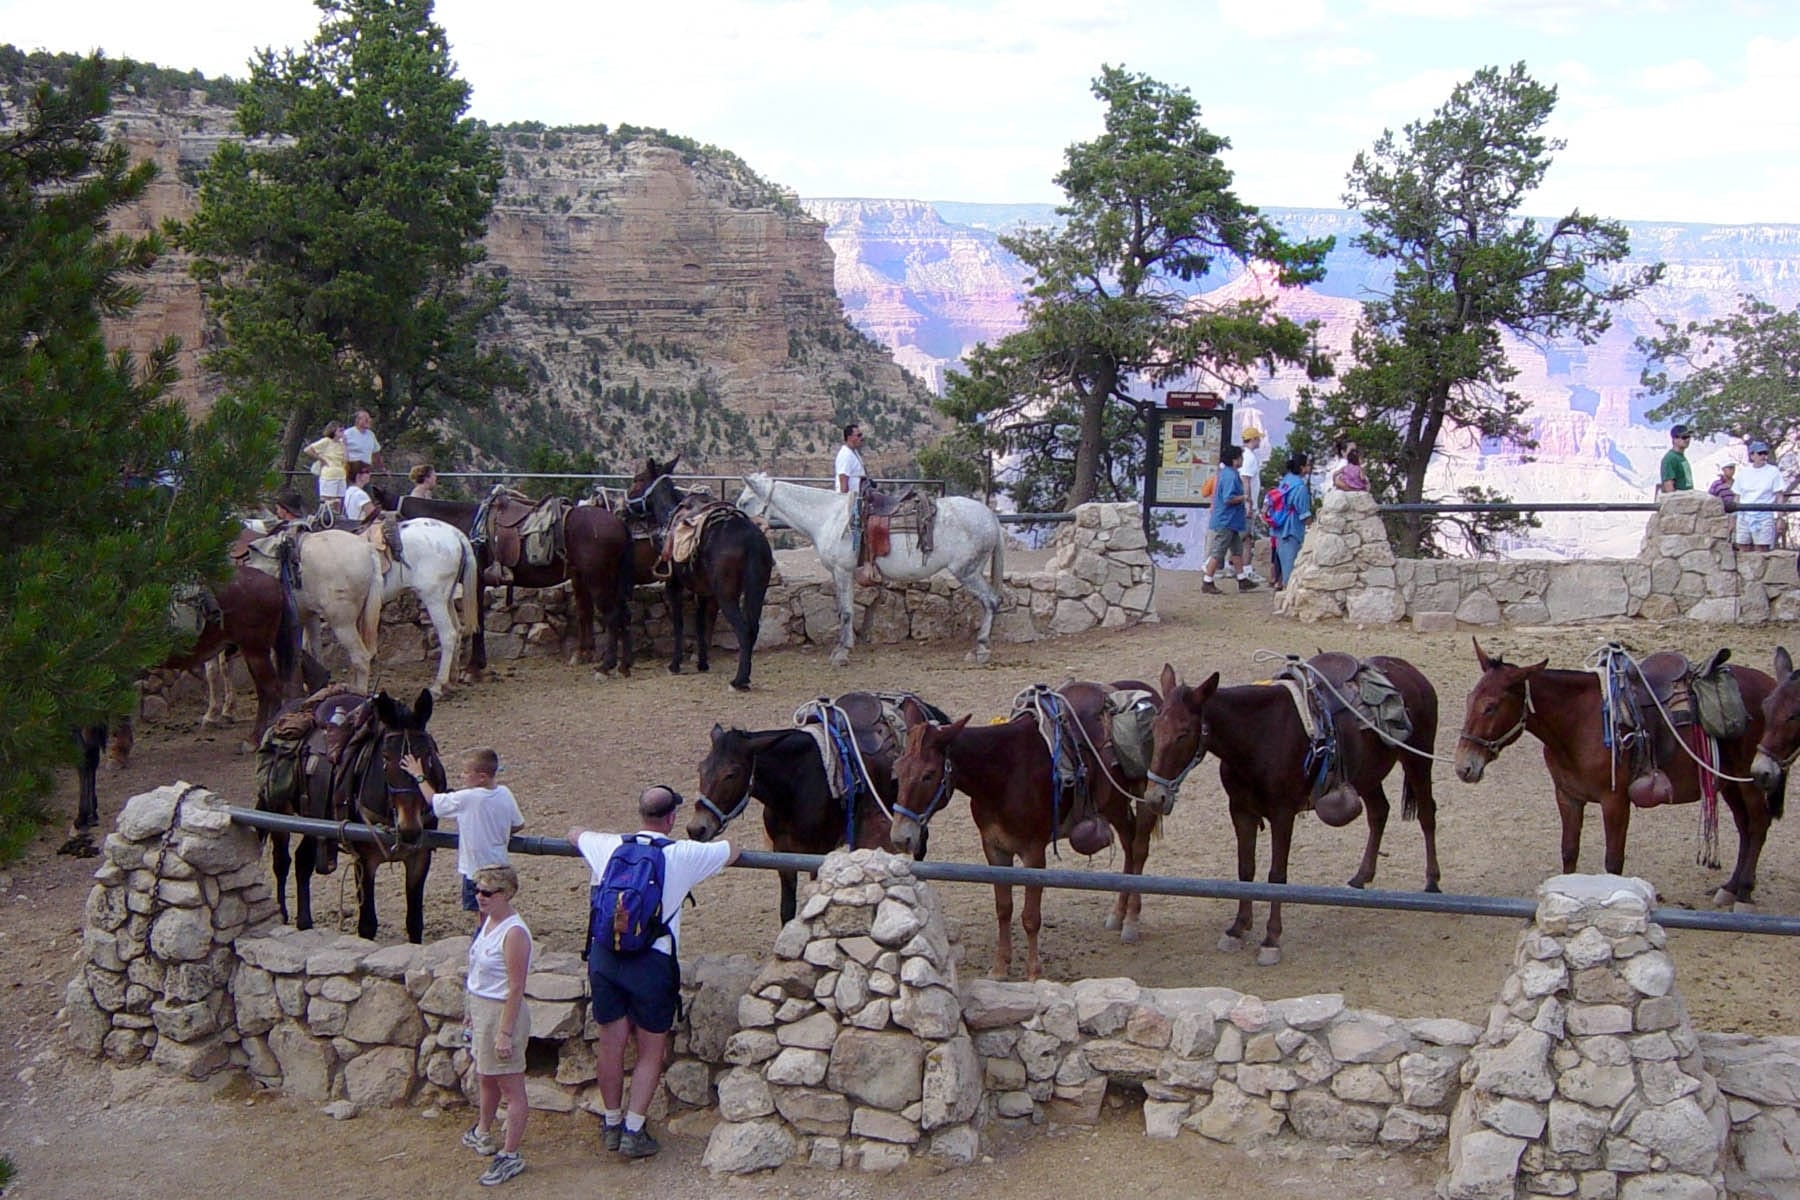 A group of mules inside a stone fence with the Grand Canyon behind them.